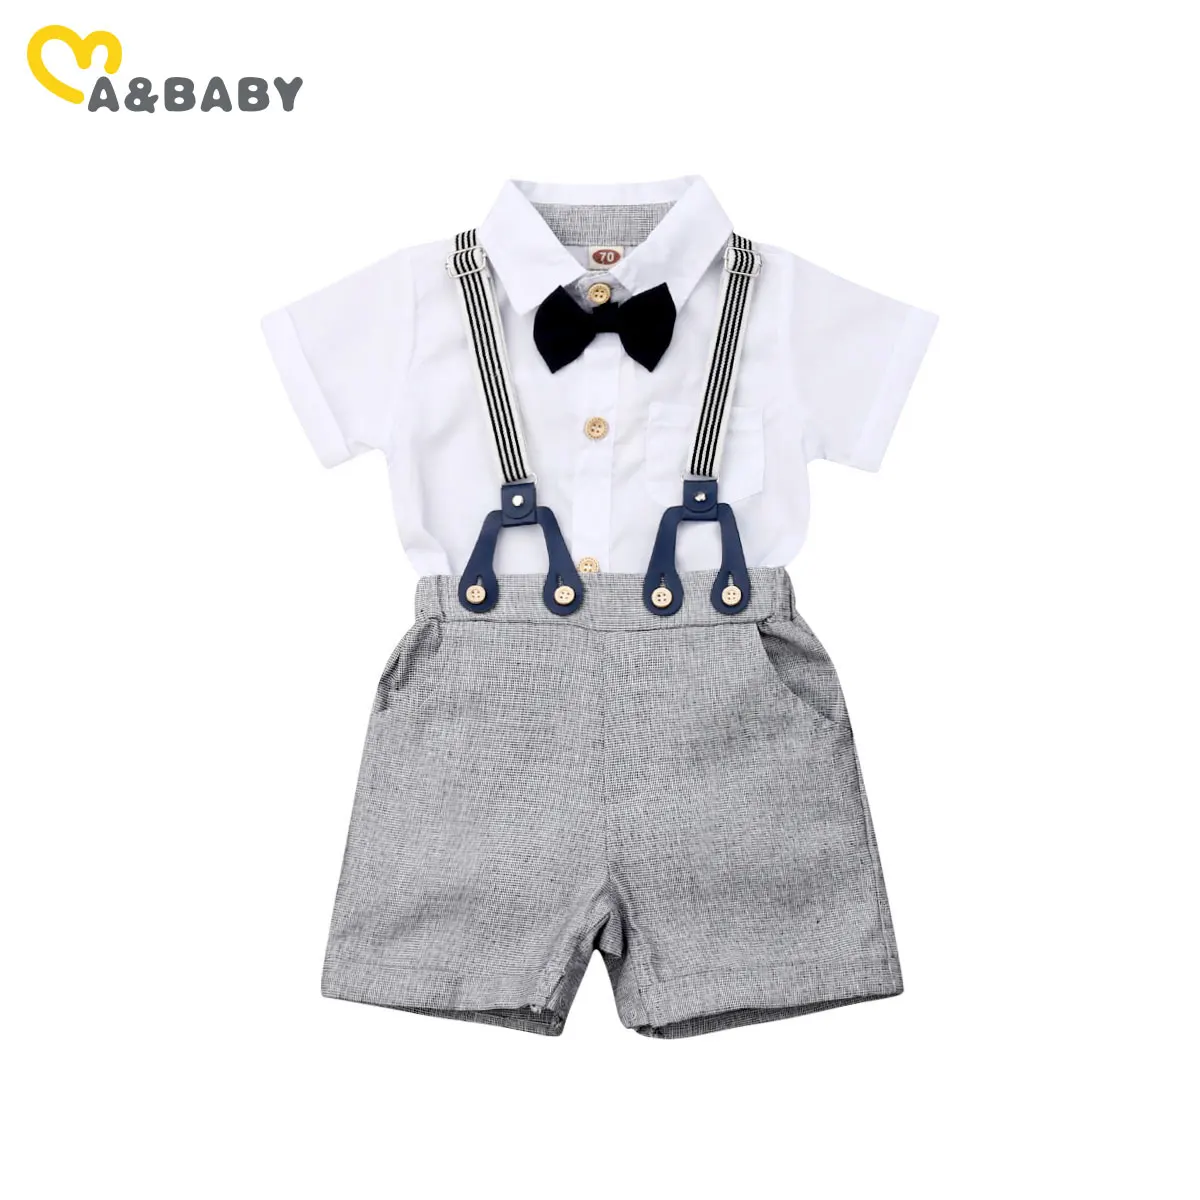 

Ma&Baby 0-24M Summer Toddler Newborn Baby Boy Clothes Set Formal Gentleman Suit Romper Overall Pants Party Birthday Outfits